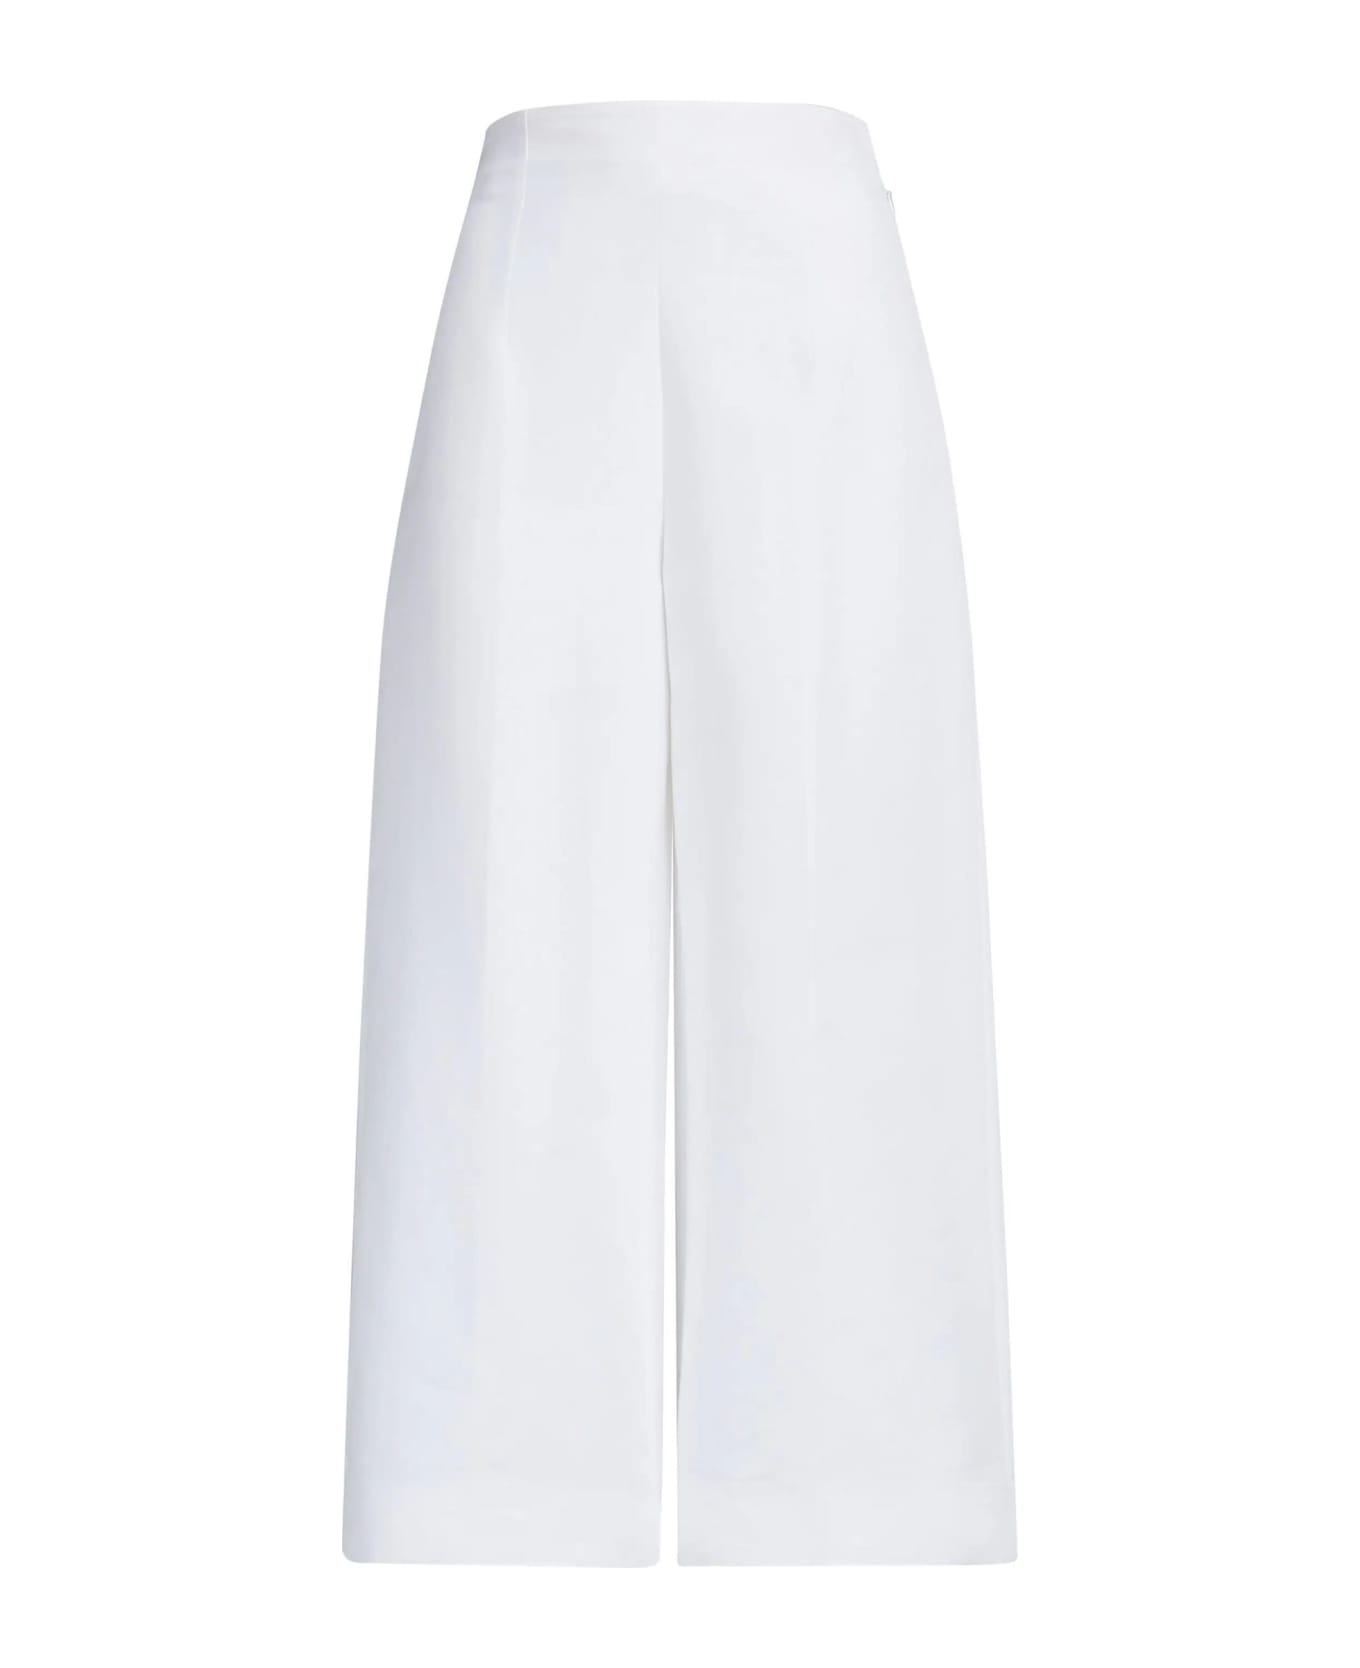 Marni Pressed Crease Cropped Trousers - White ボトムス